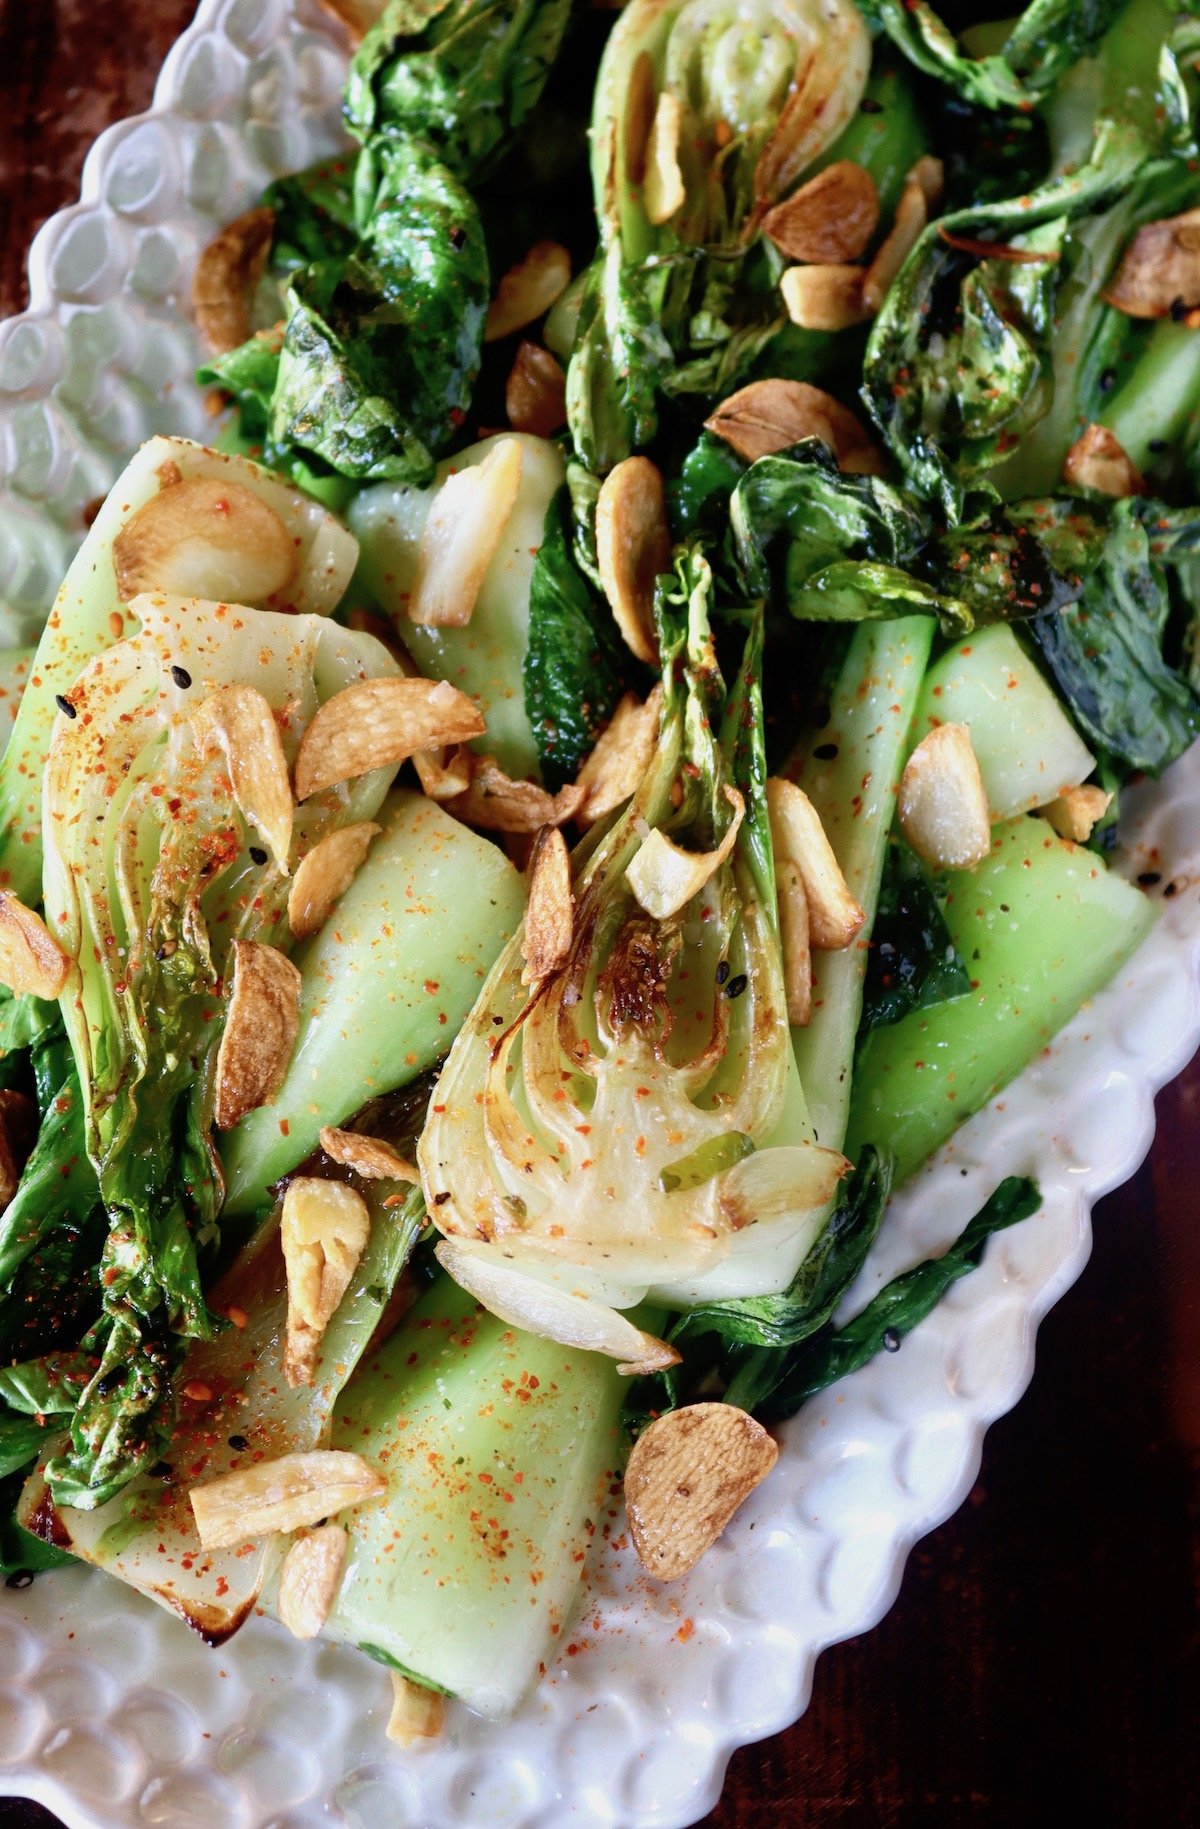 Top view of sauteed bok choy with bits of garlic on white platter.